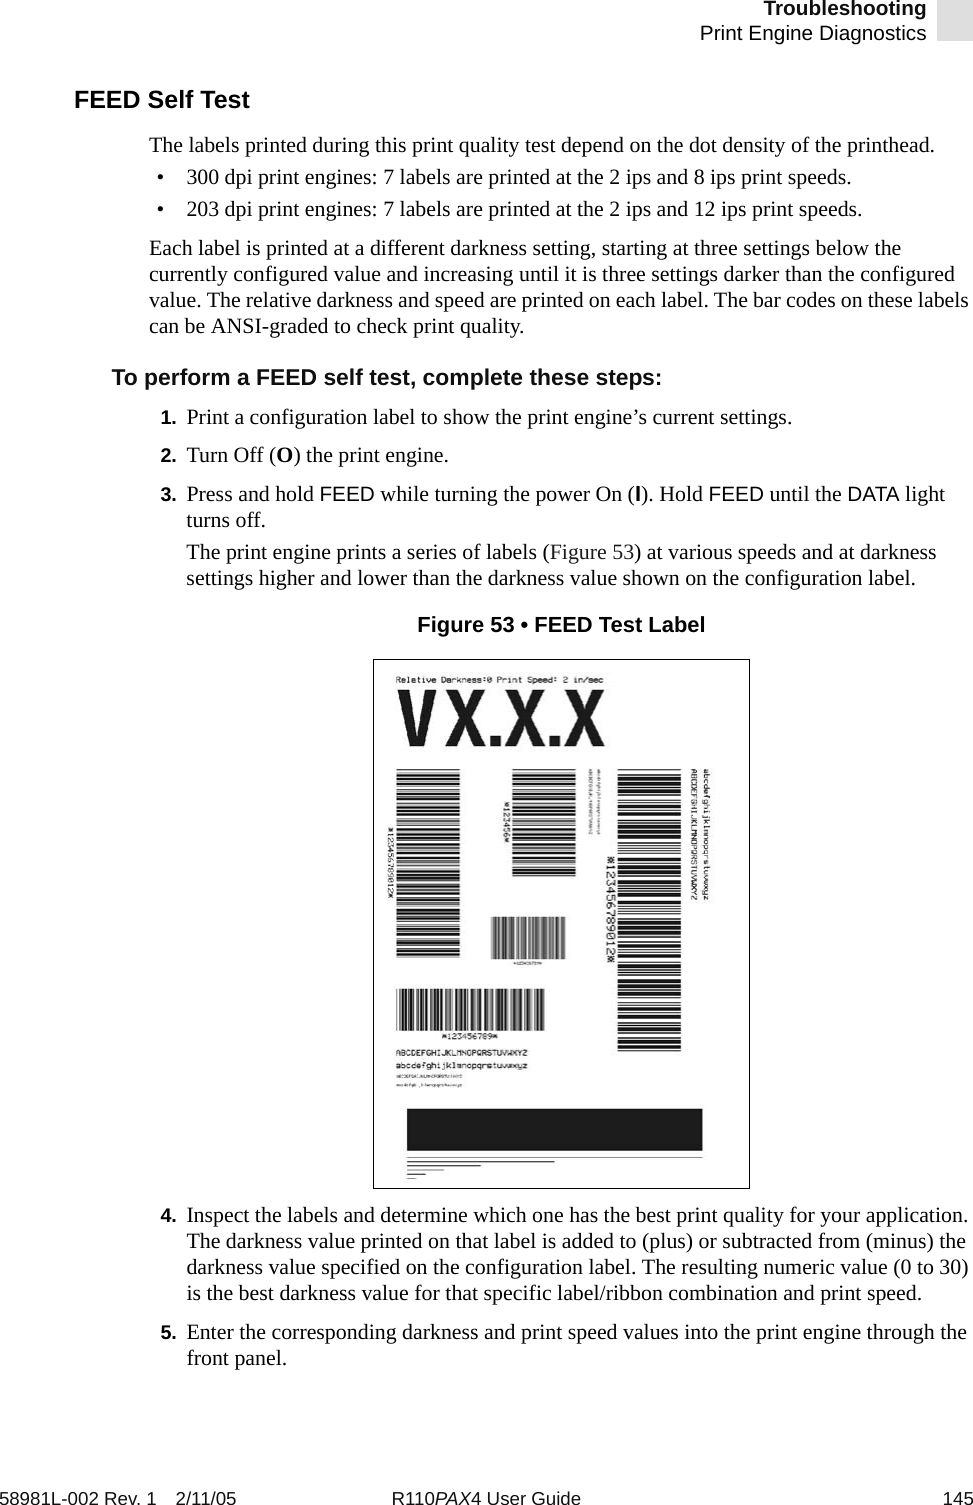 TroubleshootingPrint Engine Diagnostics58981L-002 Rev. 1 2/11/05 R110PAX4 User Guide 145FEED Self TestThe labels printed during this print quality test depend on the dot density of the printhead.• 300 dpi print engines: 7 labels are printed at the 2 ips and 8 ips print speeds.• 203 dpi print engines: 7 labels are printed at the 2 ips and 12 ips print speeds.Each label is printed at a different darkness setting, starting at three settings below the currently configured value and increasing until it is three settings darker than the configured value. The relative darkness and speed are printed on each label. The bar codes on these labels can be ANSI-graded to check print quality.To perform a FEED self test, complete these steps:1. Print a configuration label to show the print engine’s current settings.2. Turn Off (O) the print engine.3. Press and hold FEED while turning the power On (I). Hold FEED until the DATA light turns off.The print engine prints a series of labels (Figure 53) at various speeds and at darkness settings higher and lower than the darkness value shown on the configuration label.Figure 53 • FEED Test Label4. Inspect the labels and determine which one has the best print quality for your application. The darkness value printed on that label is added to (plus) or subtracted from (minus) the darkness value specified on the configuration label. The resulting numeric value (0 to 30) is the best darkness value for that specific label/ribbon combination and print speed. 5. Enter the corresponding darkness and print speed values into the print engine through the front panel.